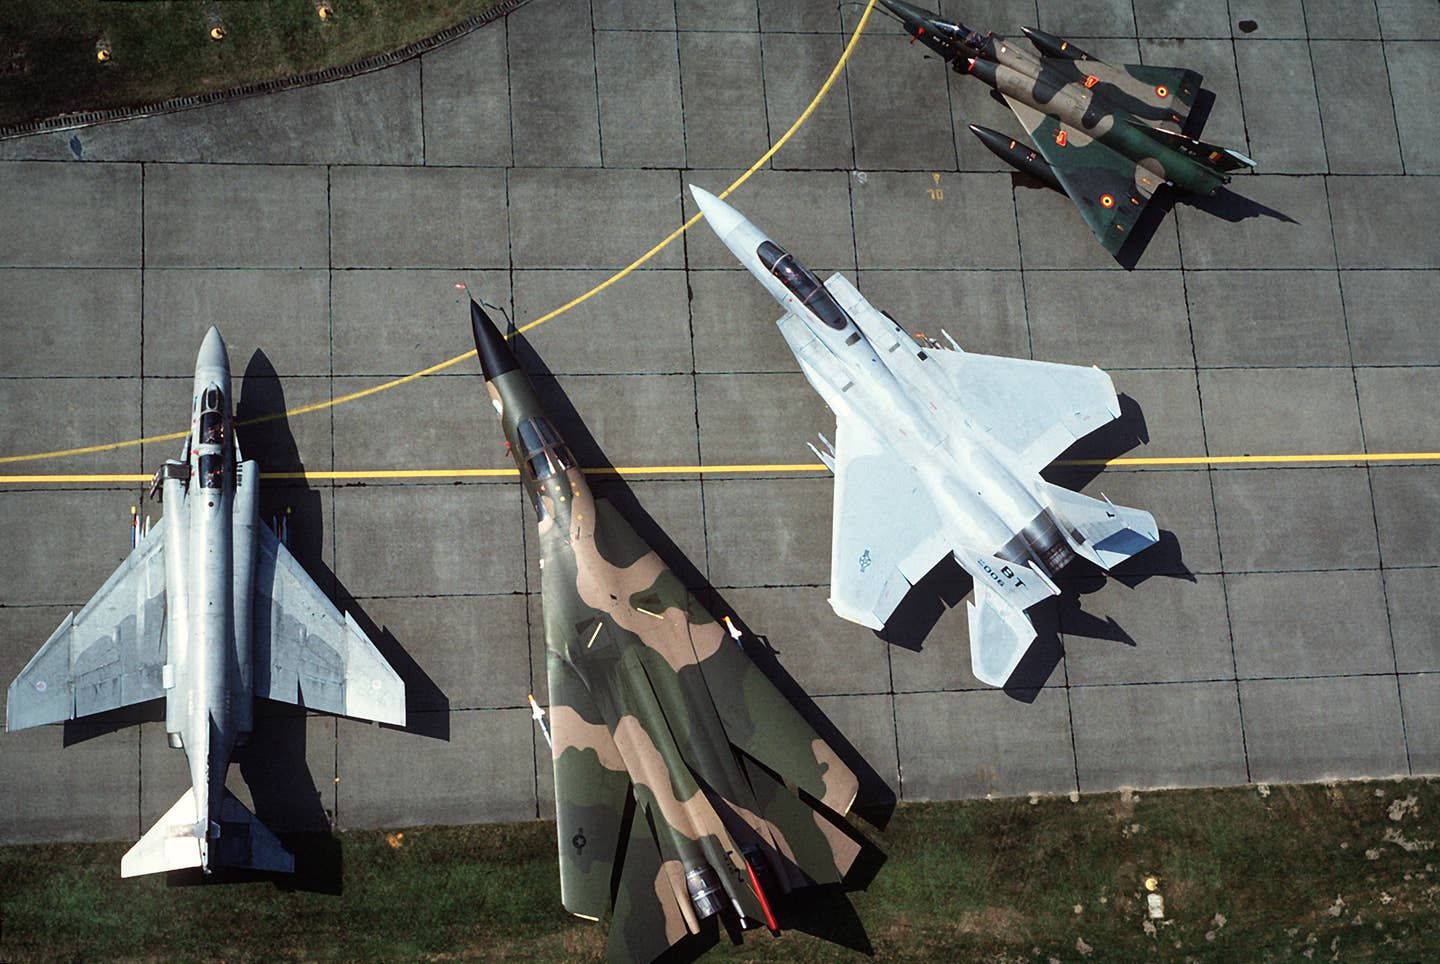 an_aerial_view_of_a_multinational_multiaircraft_static_display_including_left_to_right_an_f-4_phantom_ii_an_f-111_an_f-15_eagle_and_a_belgian_mirage_df-st-87-10648.jpg